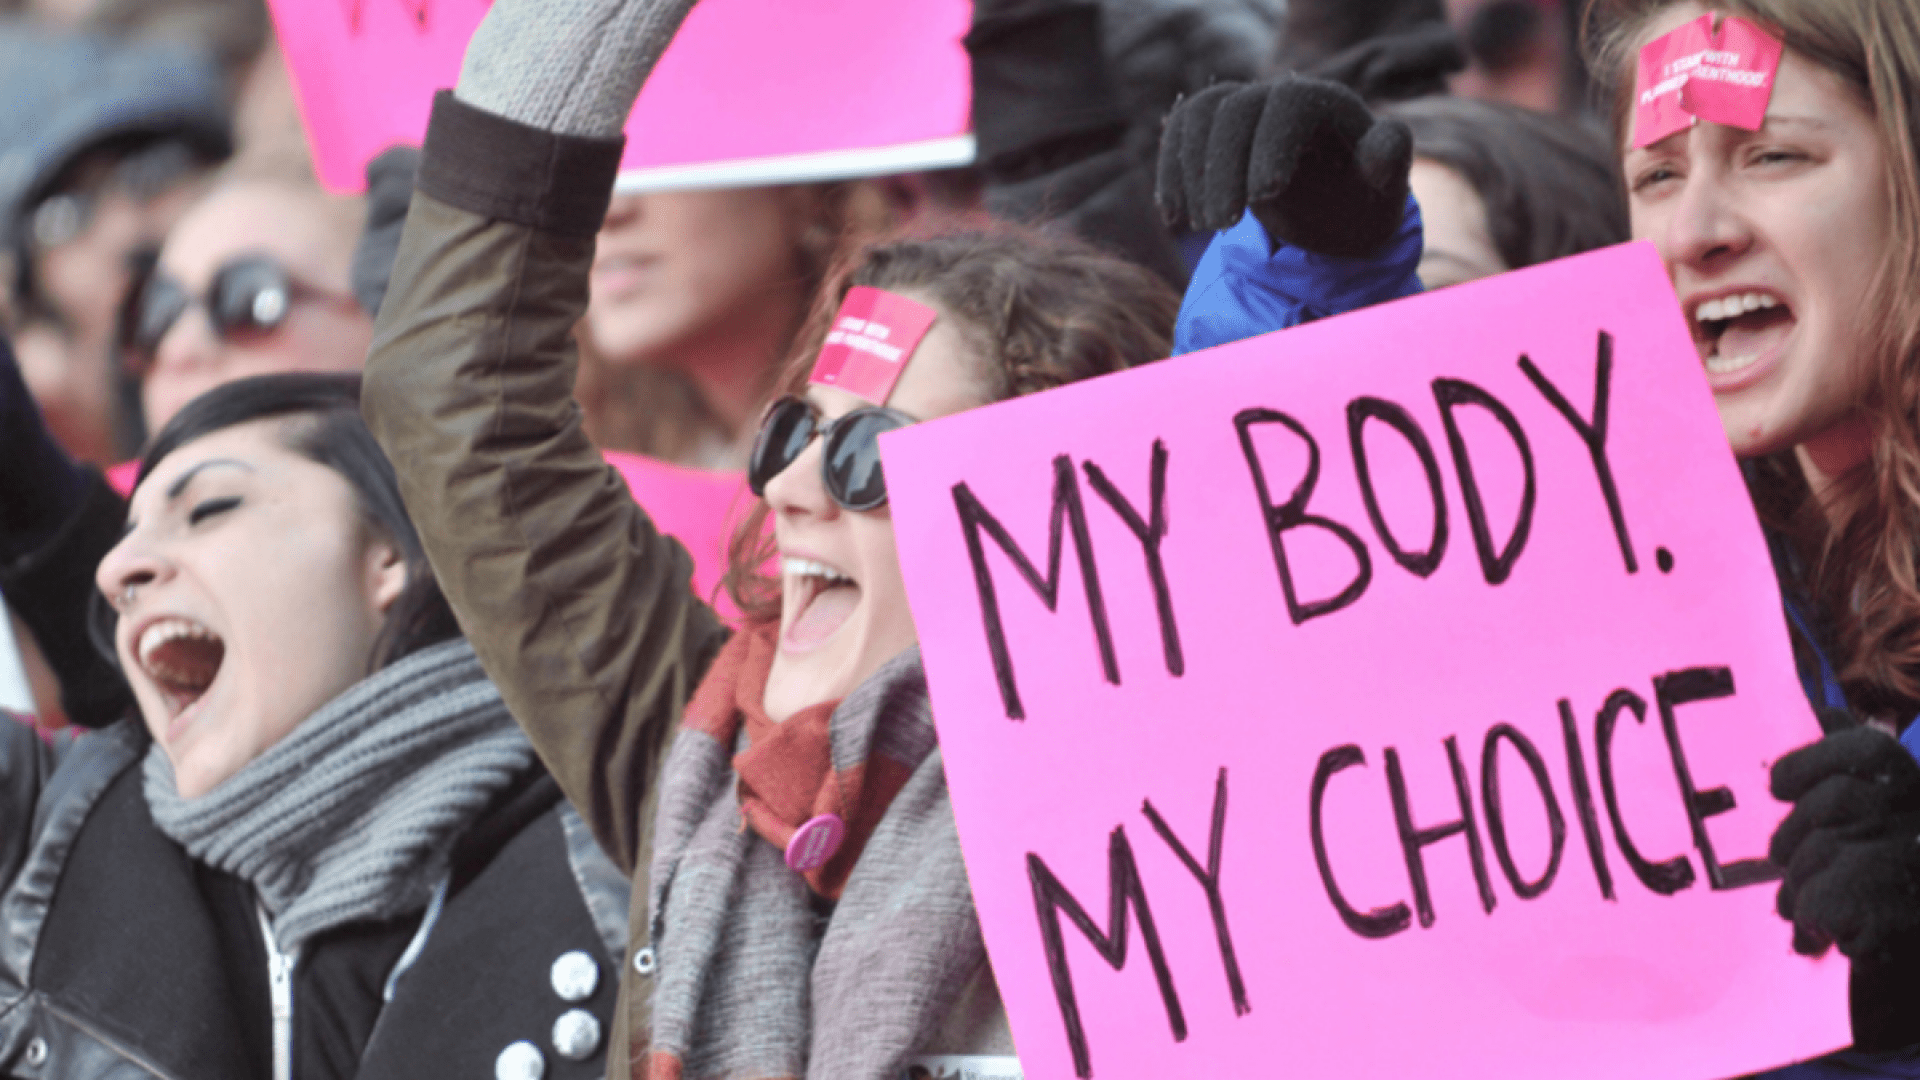 my body my choicd sexual reproductive health demonstration